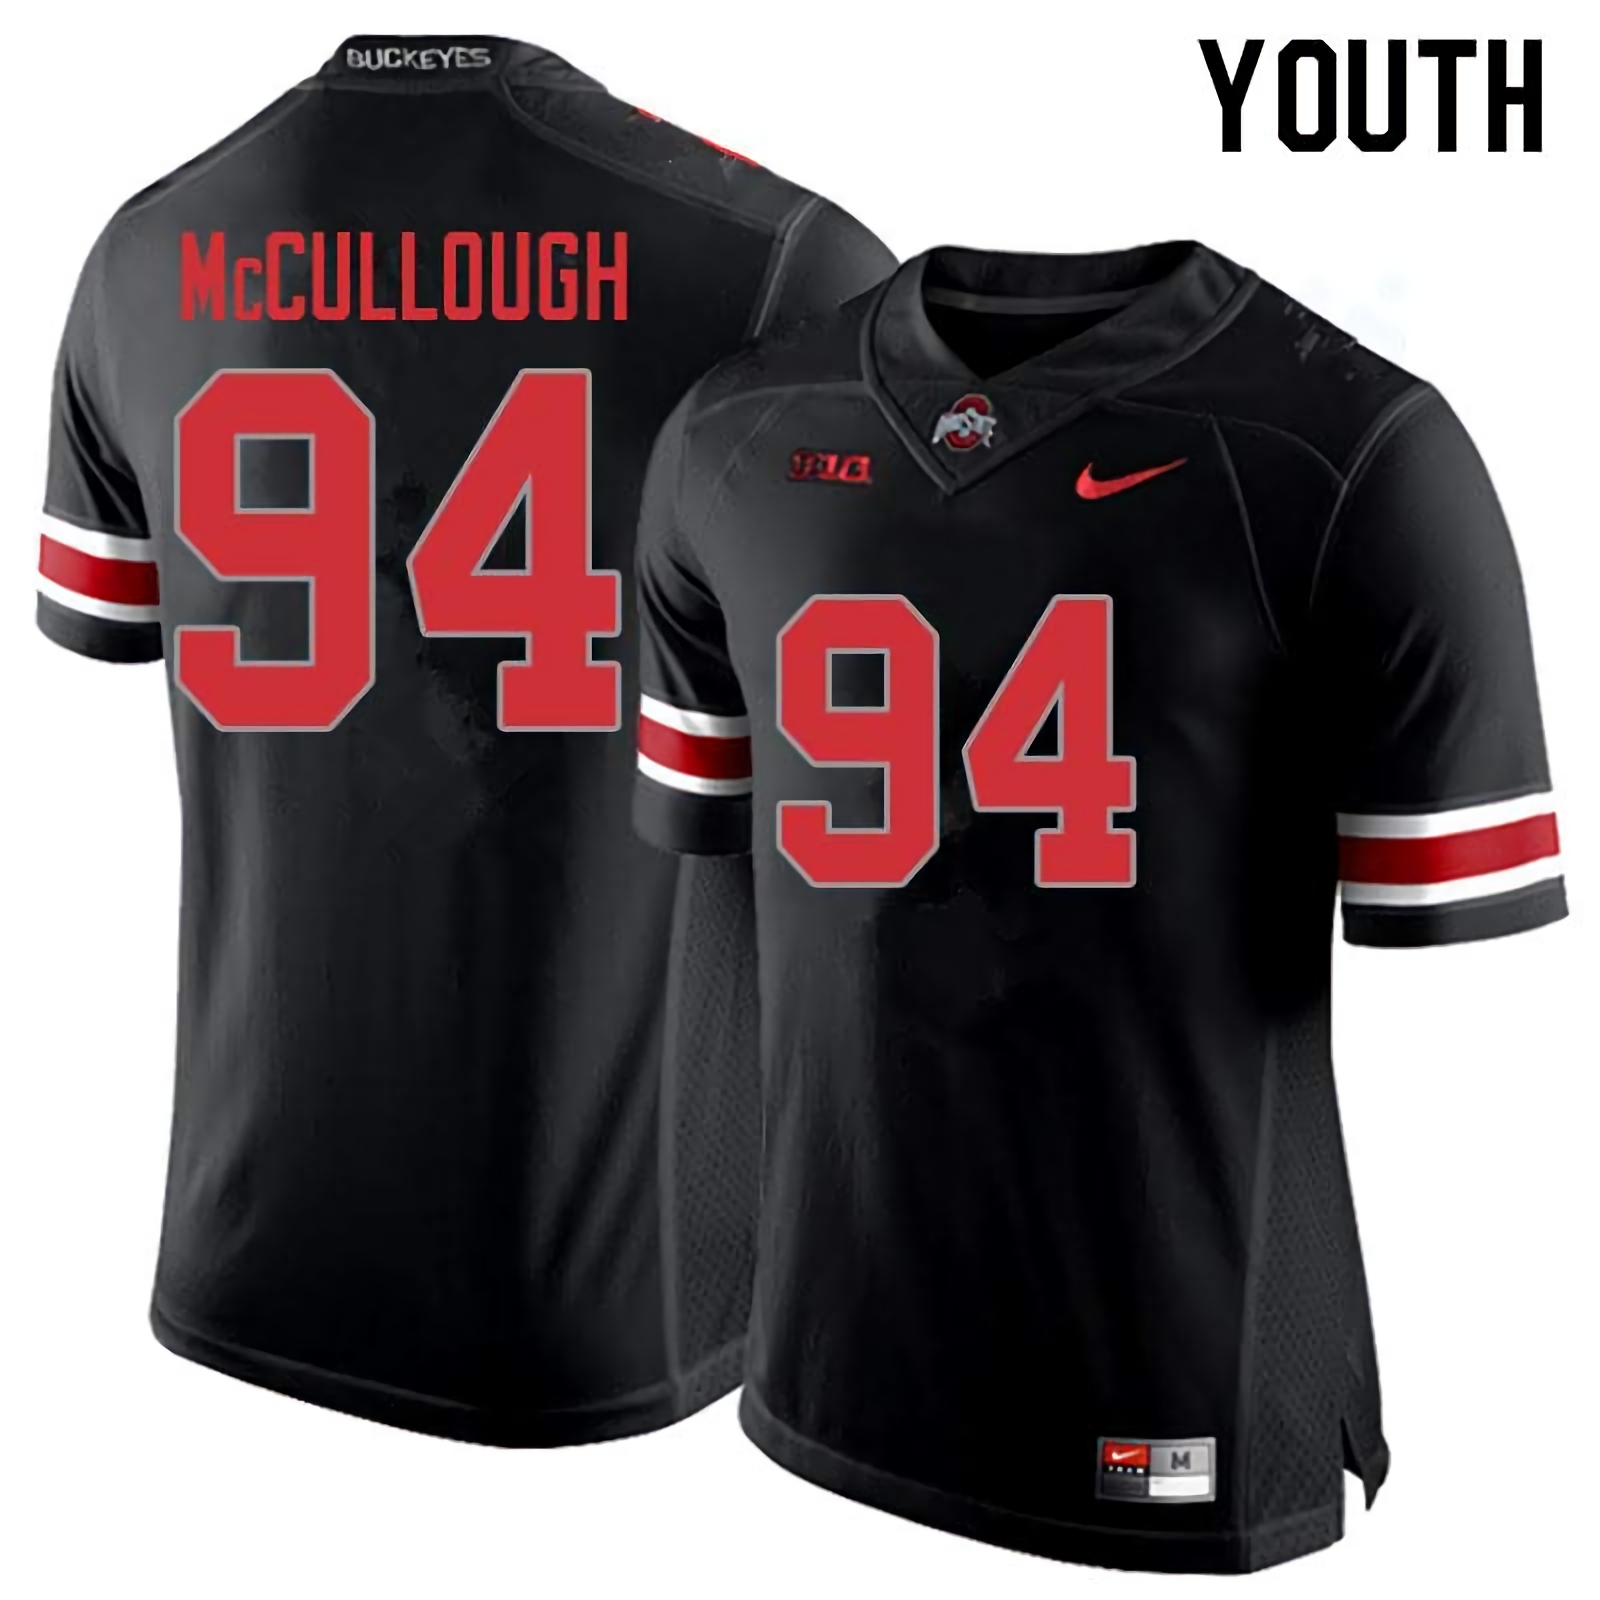 Roen McCullough Ohio State Buckeyes Youth NCAA #94 Nike Blackout College Stitched Football Jersey PEH8356QL